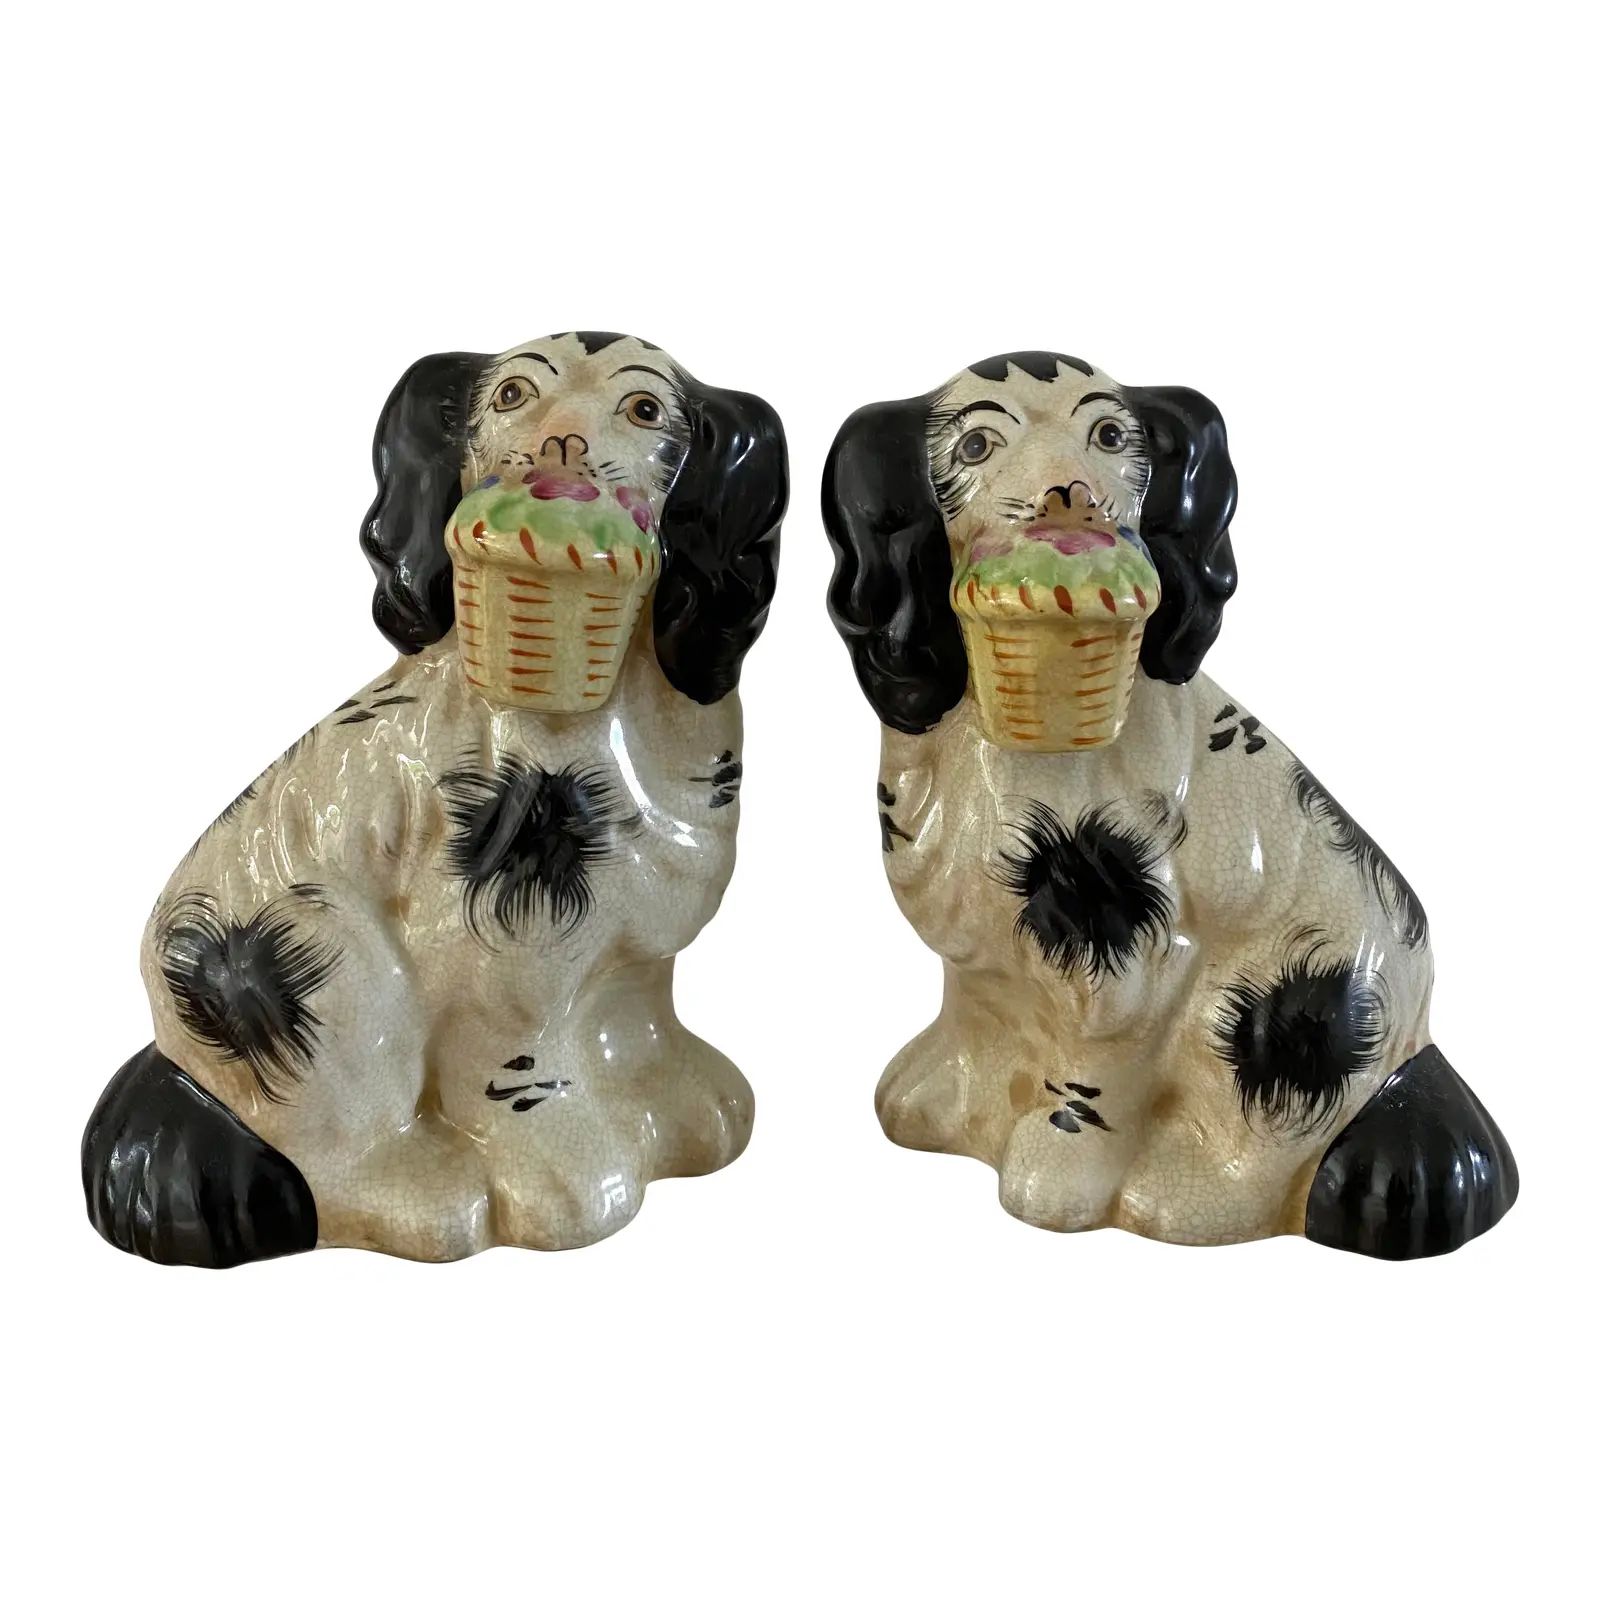 English Staffordshire-Style Dogs With Flower Baskets Figurines - a Pair | Chairish